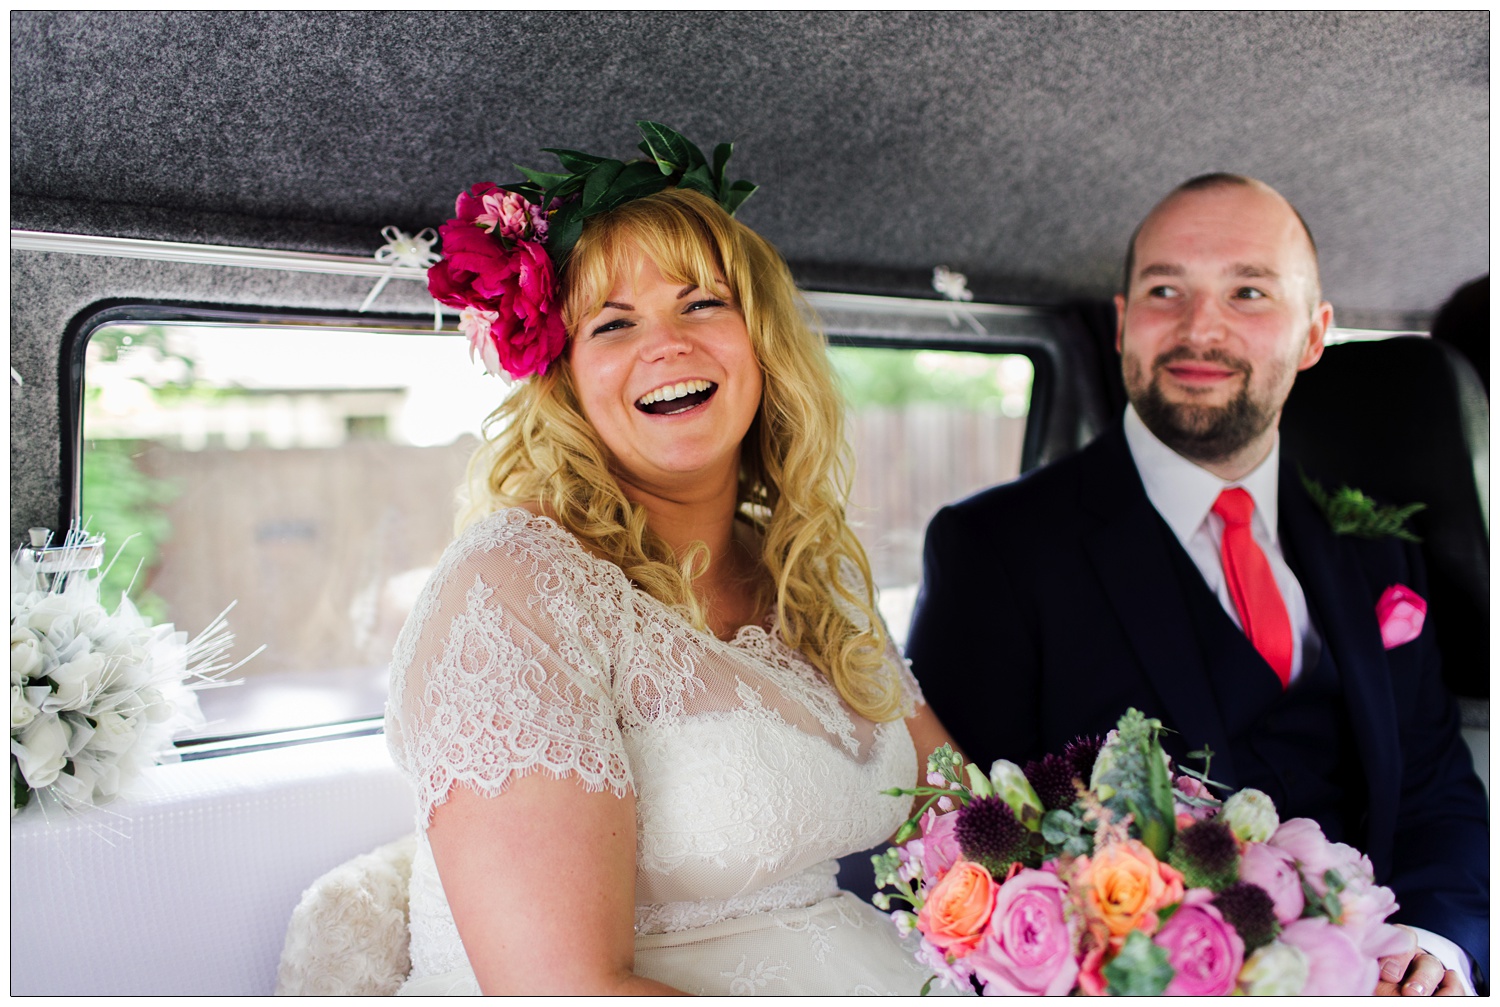 Bride is laughing at the camera in a camper van.